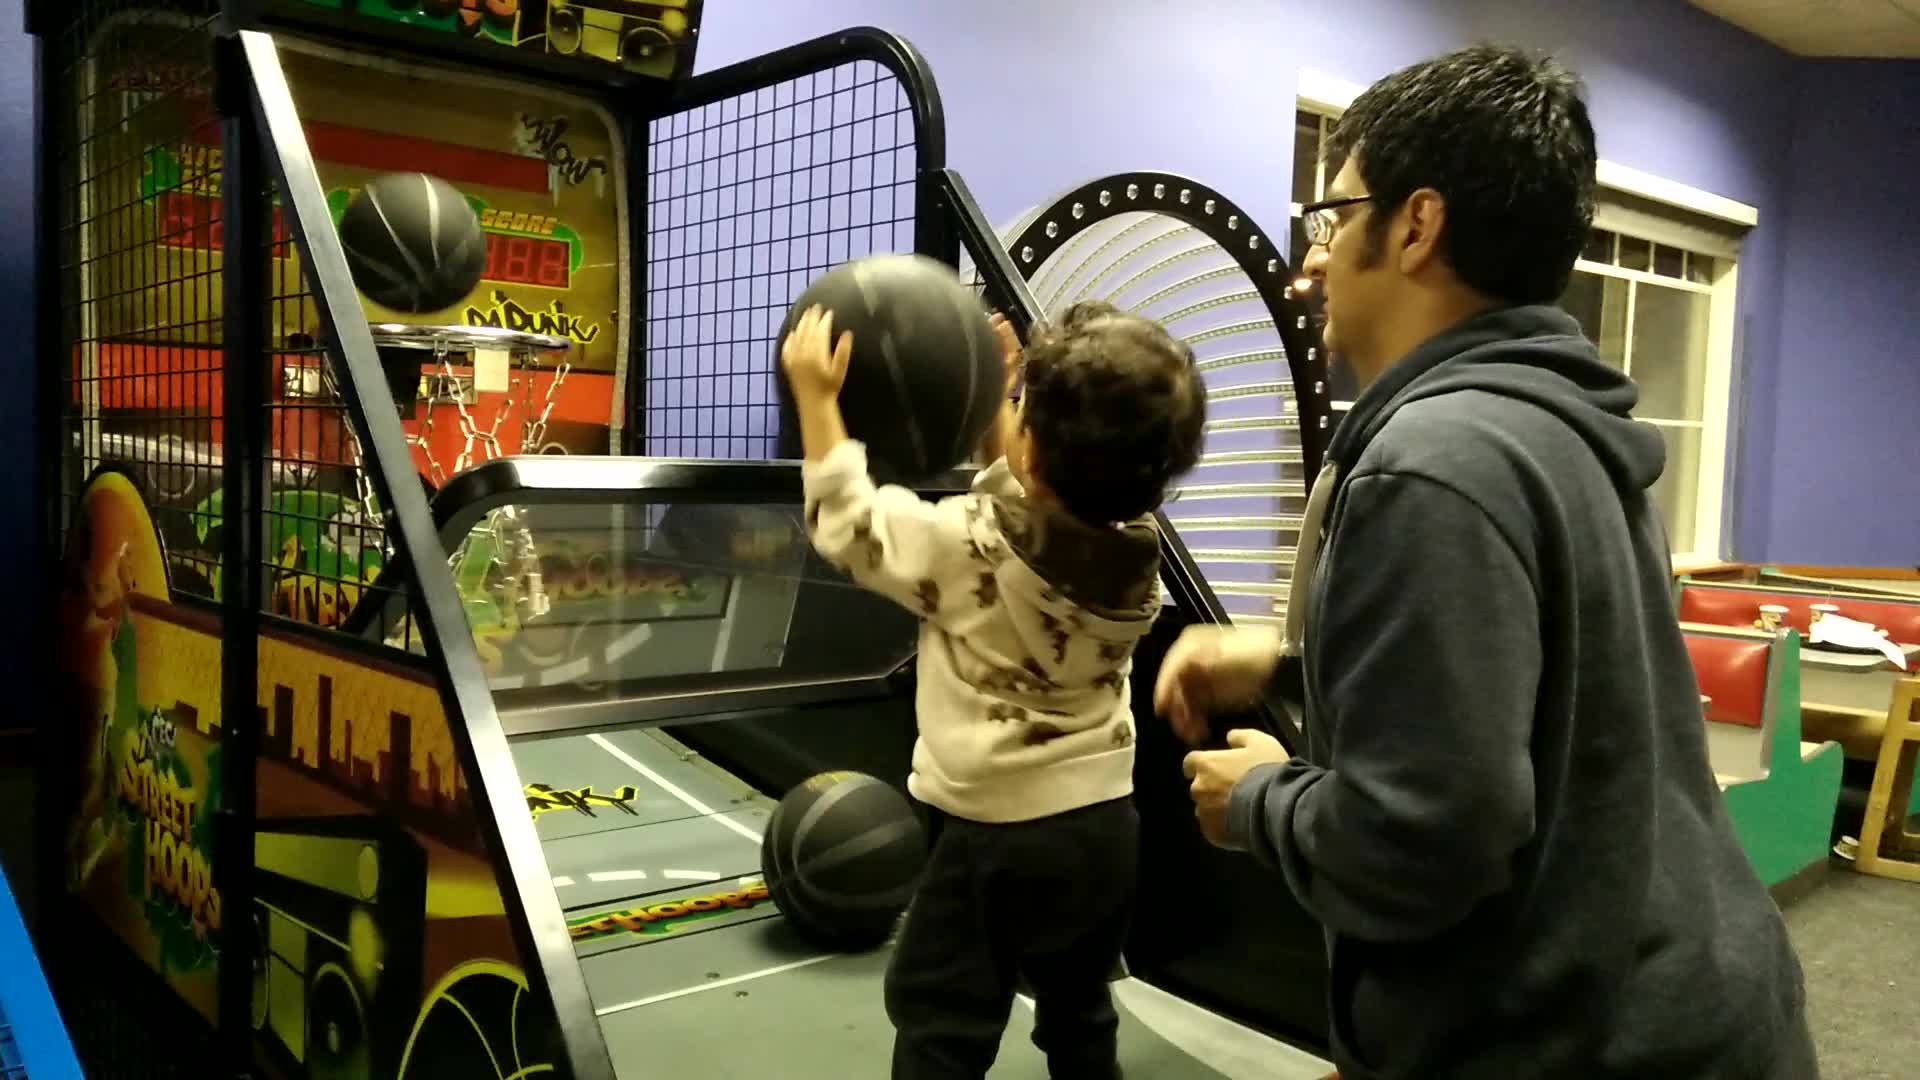 Eren playing basketball with me at Chuck E. Cheese's